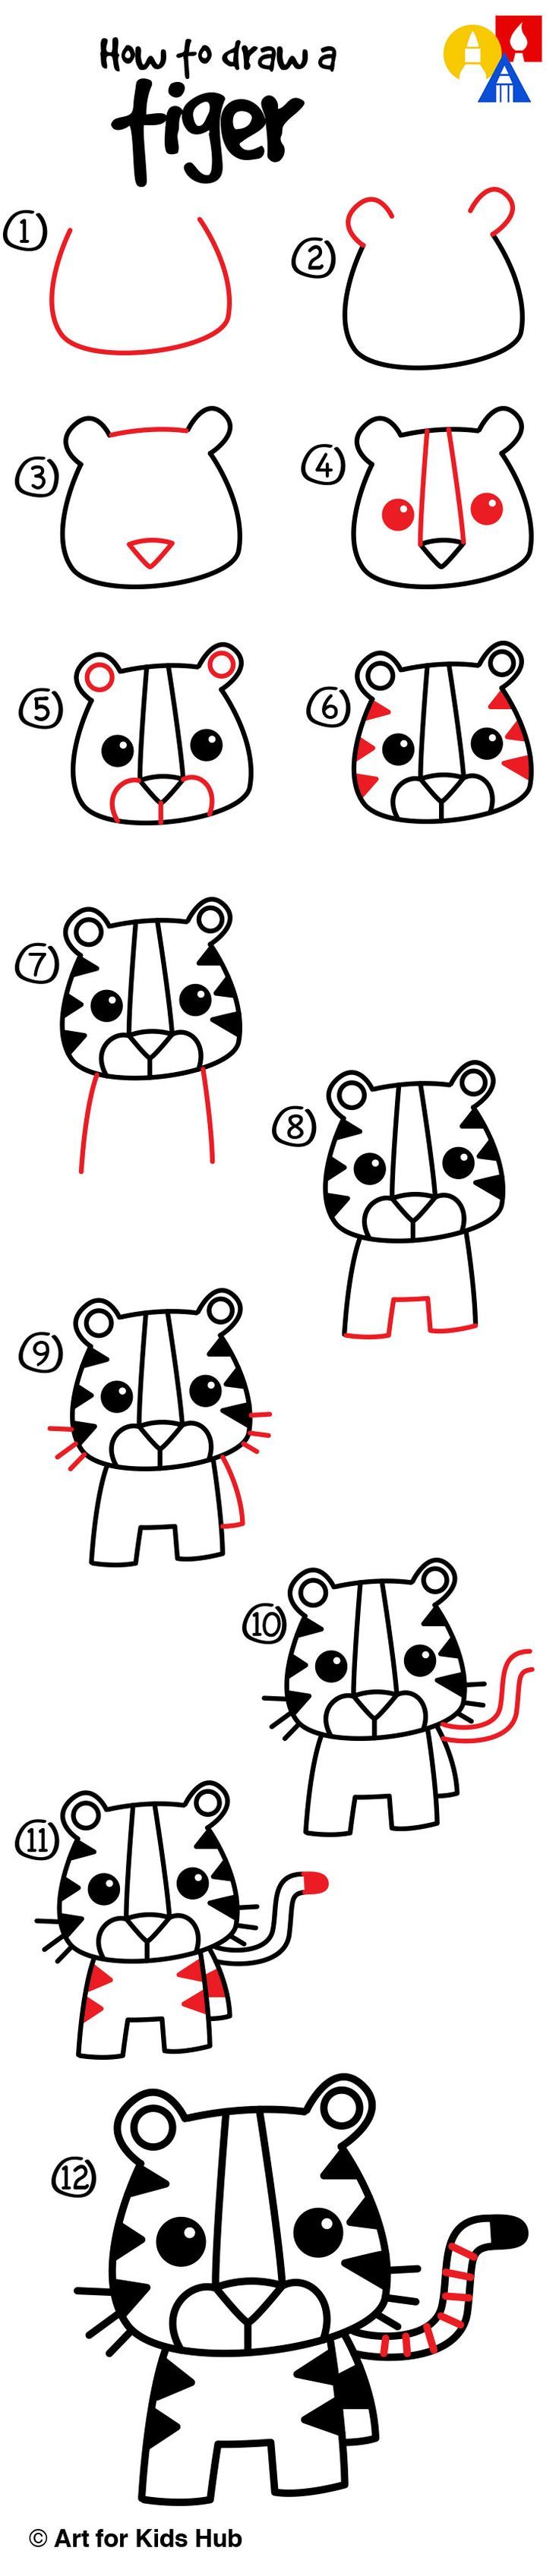 How to draw a cartoon tiger, just for kids!